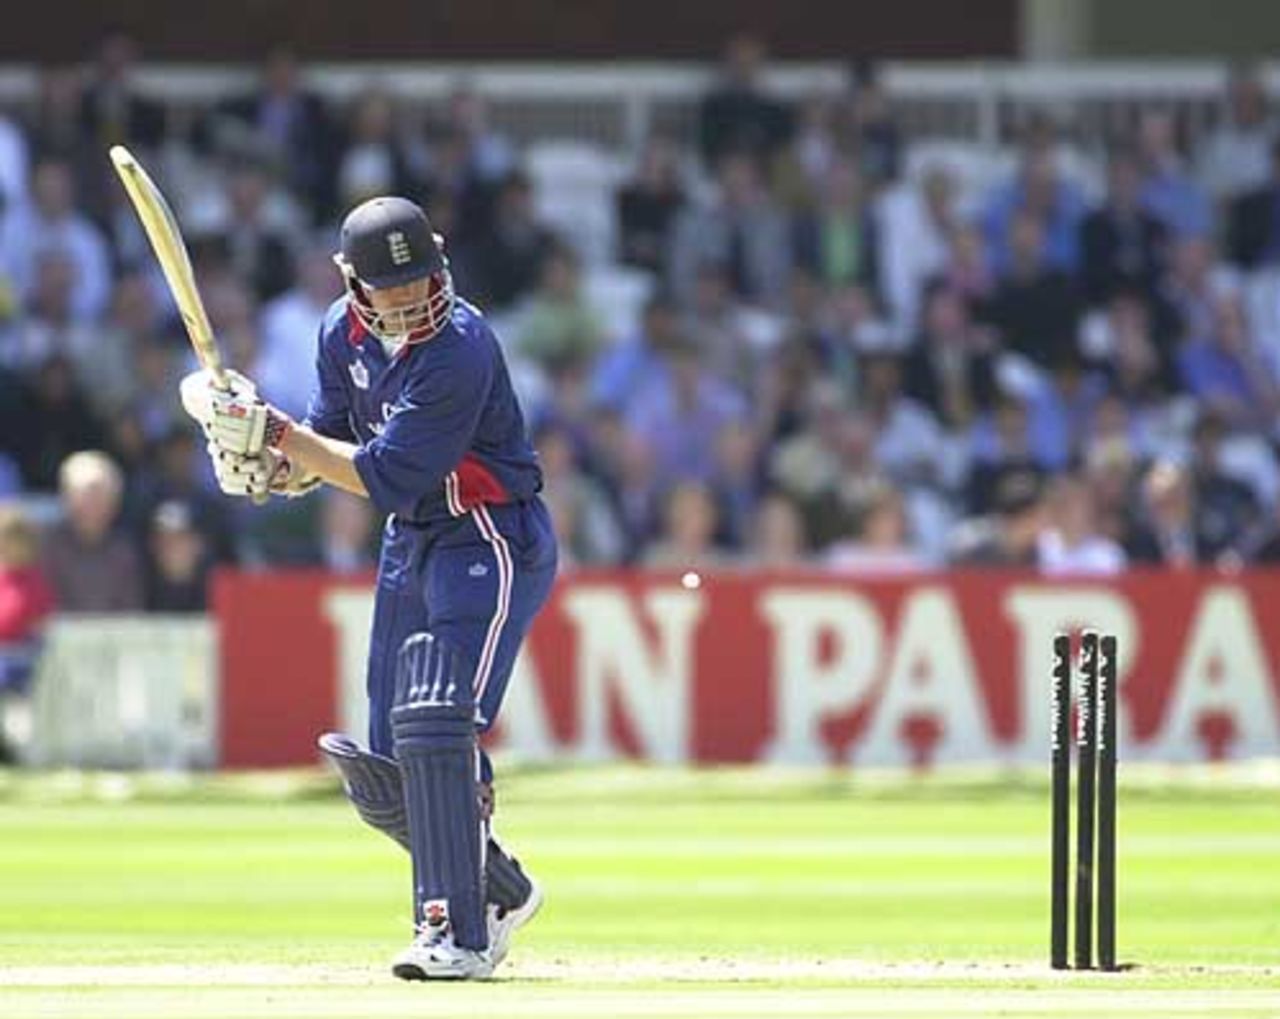 Knight is bowled Khan 14, NatWest Series Final, 13th July 2002